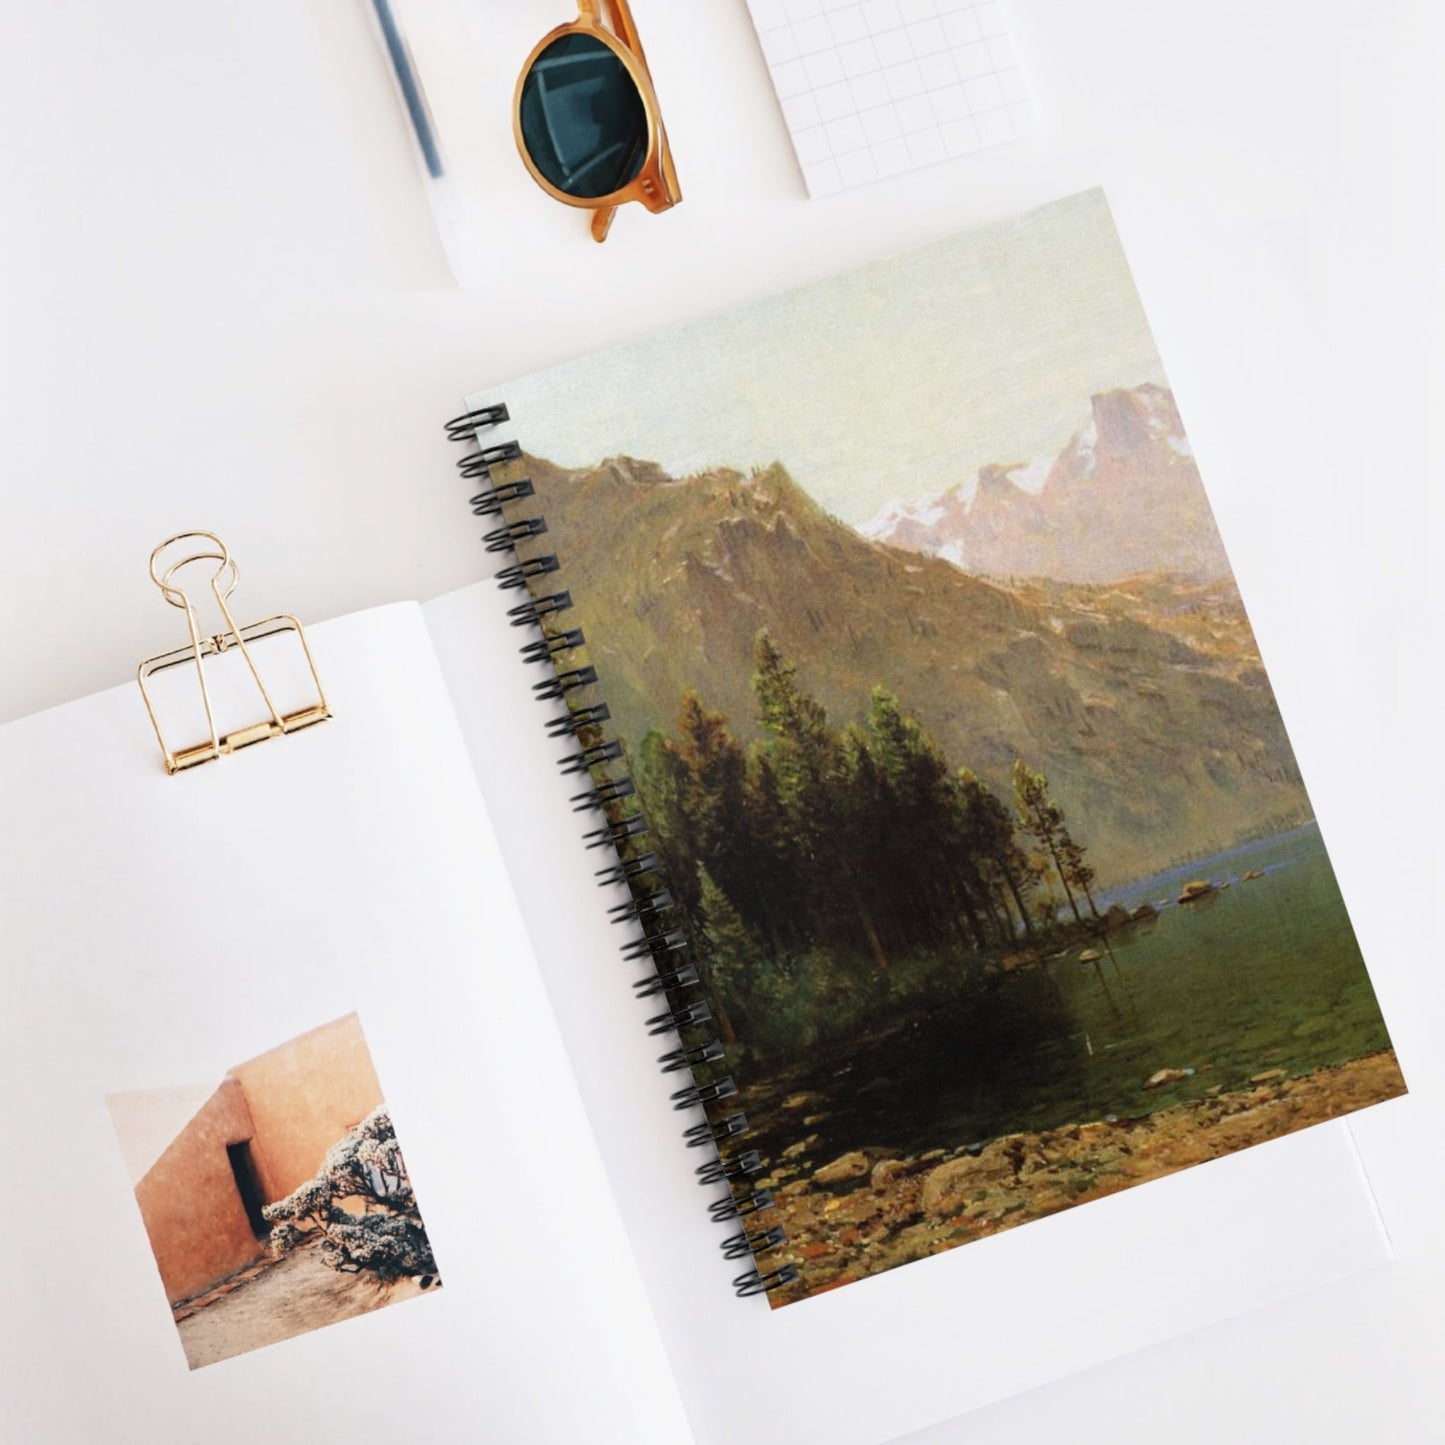 Lake and Mountains Spiral Notebook Displayed on Desk